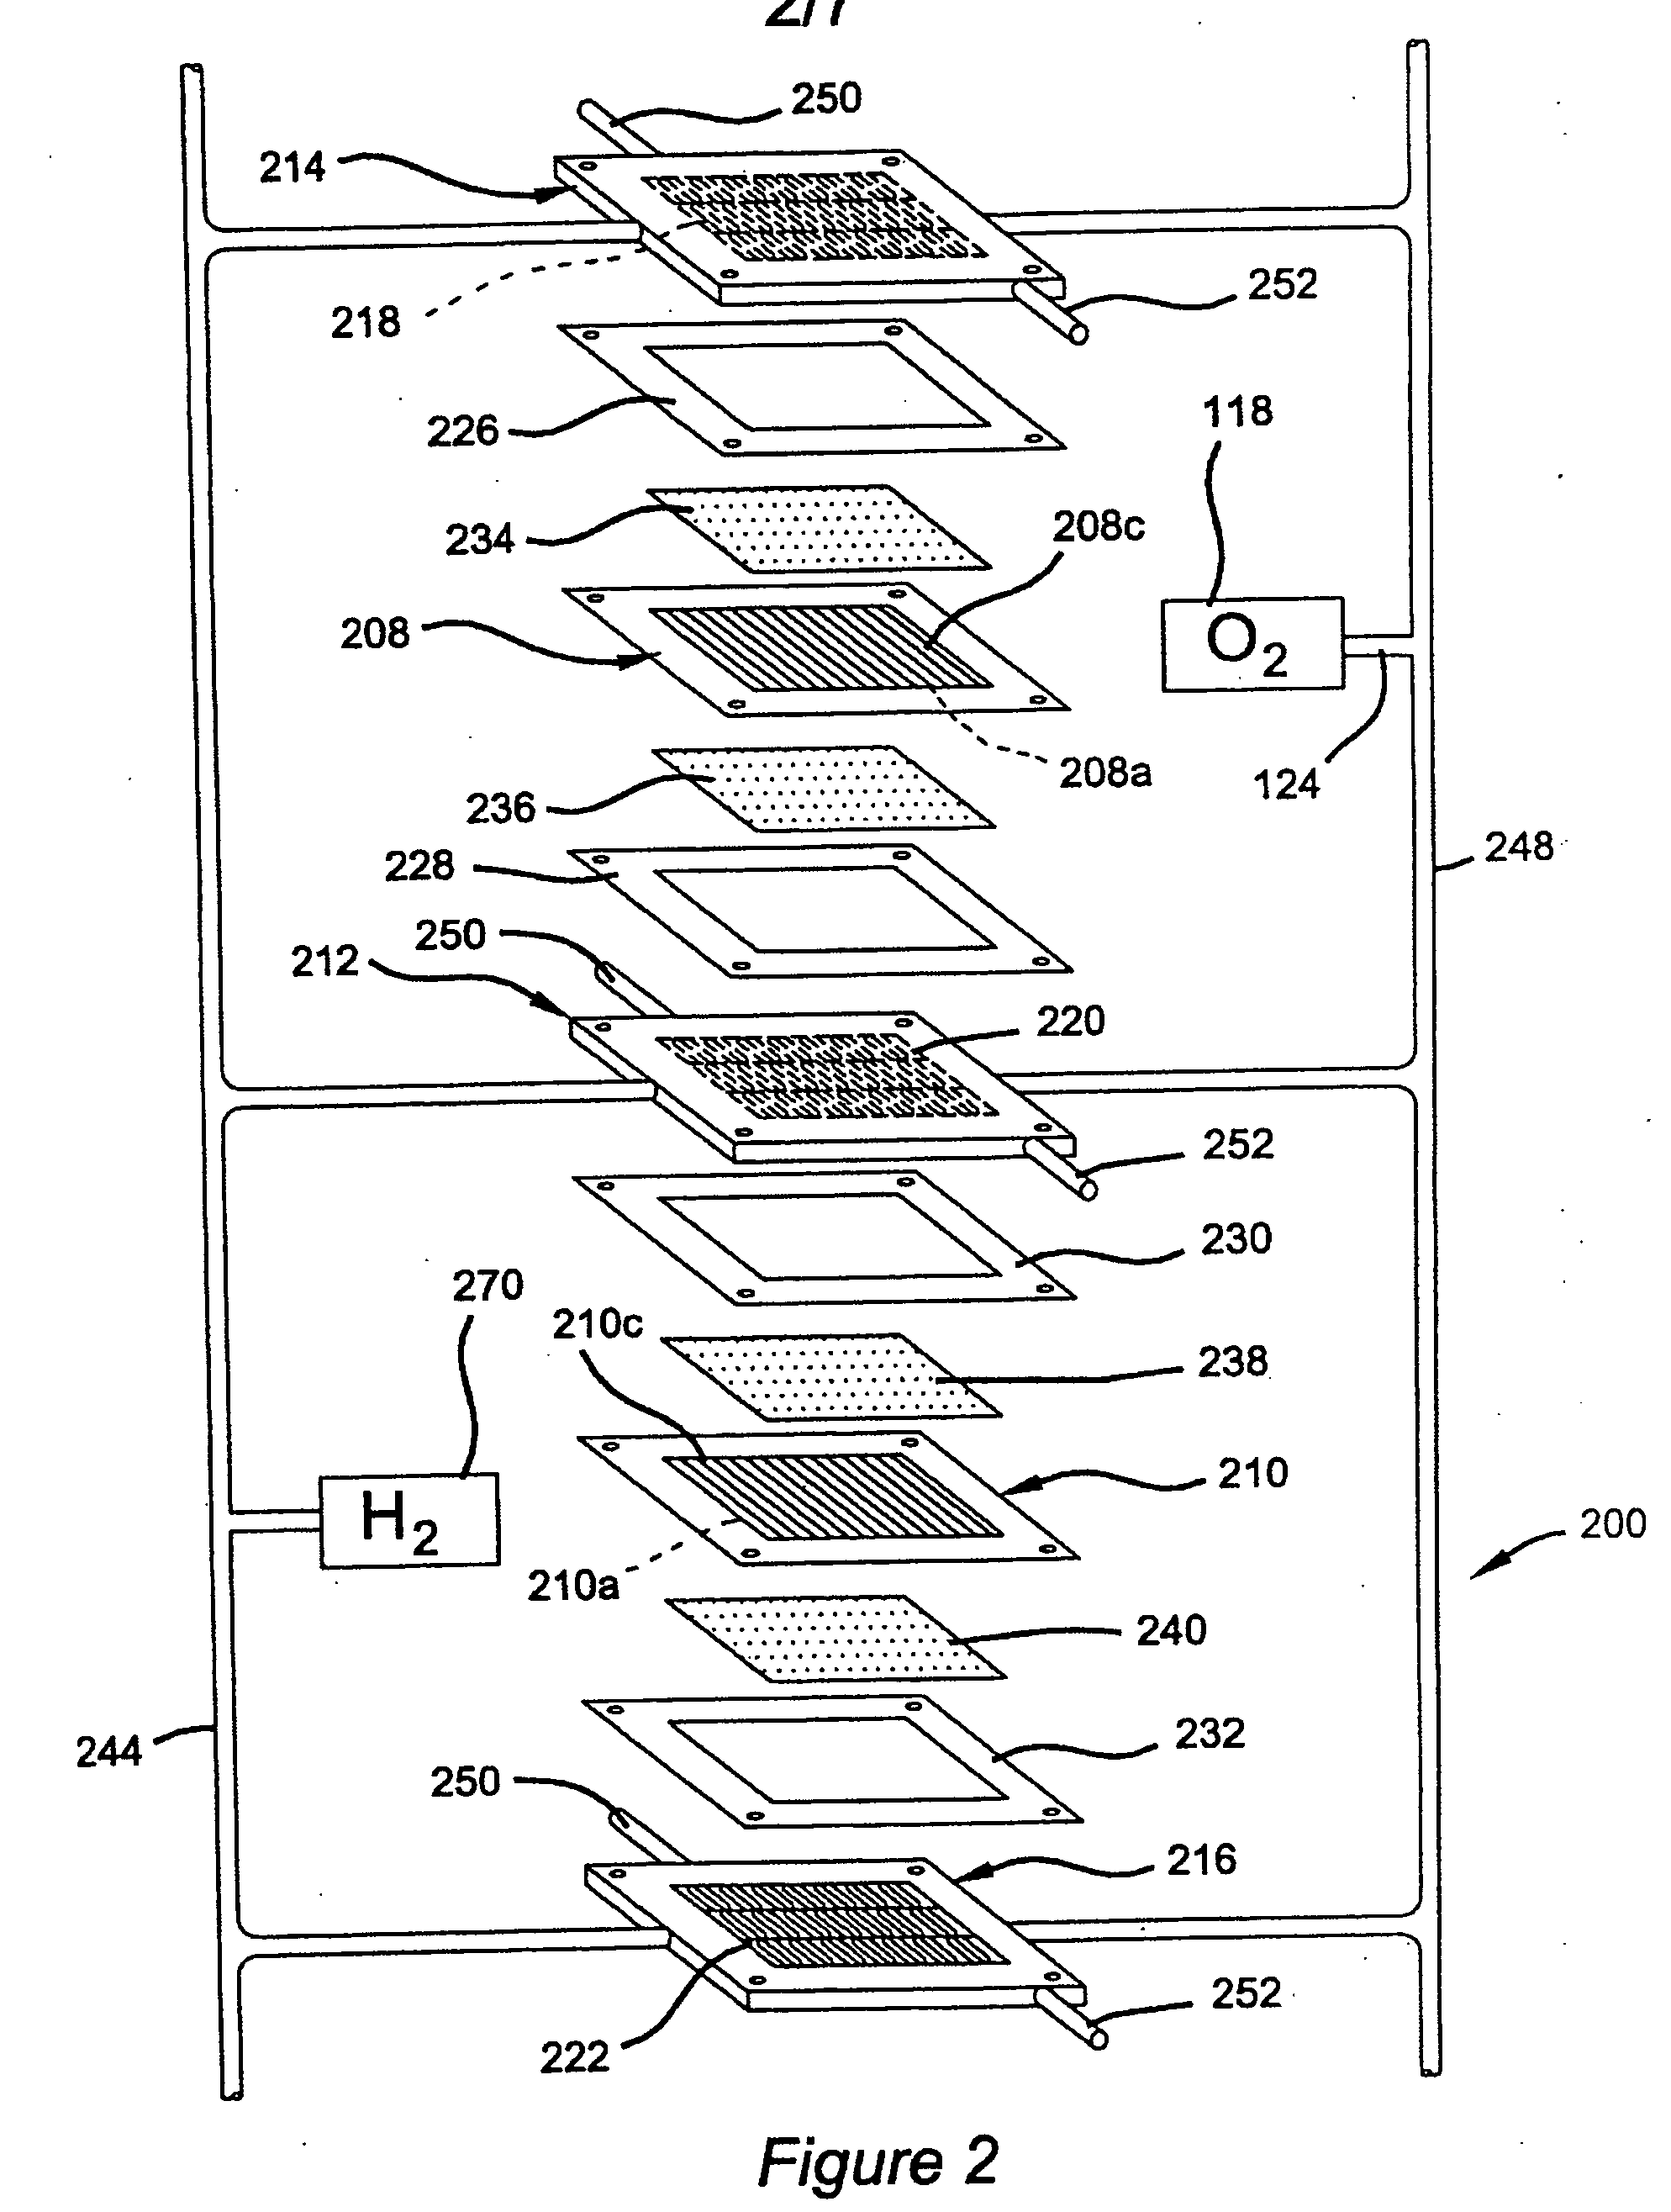 Electrical current measurement in a fuel cell